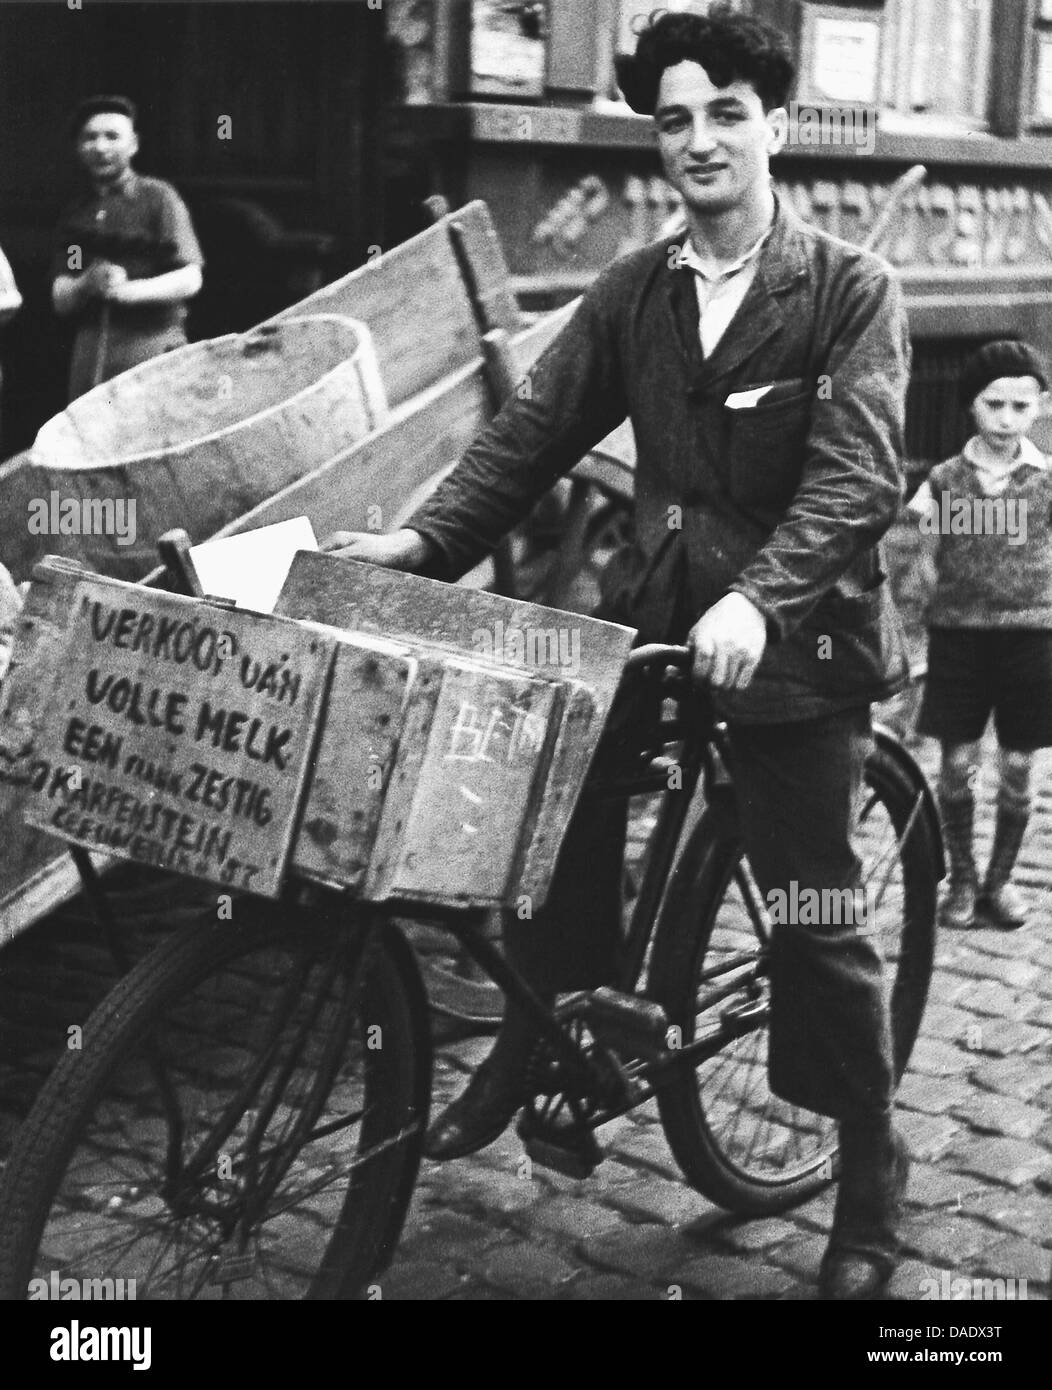 Antwerp 1934, delivery boy on bike selling milk in jewish quarter. Image by photographer Fred Stein (1909-1967) who emigrated 1933 from Nazi Germany to France and finally to the USA. Stock Photo